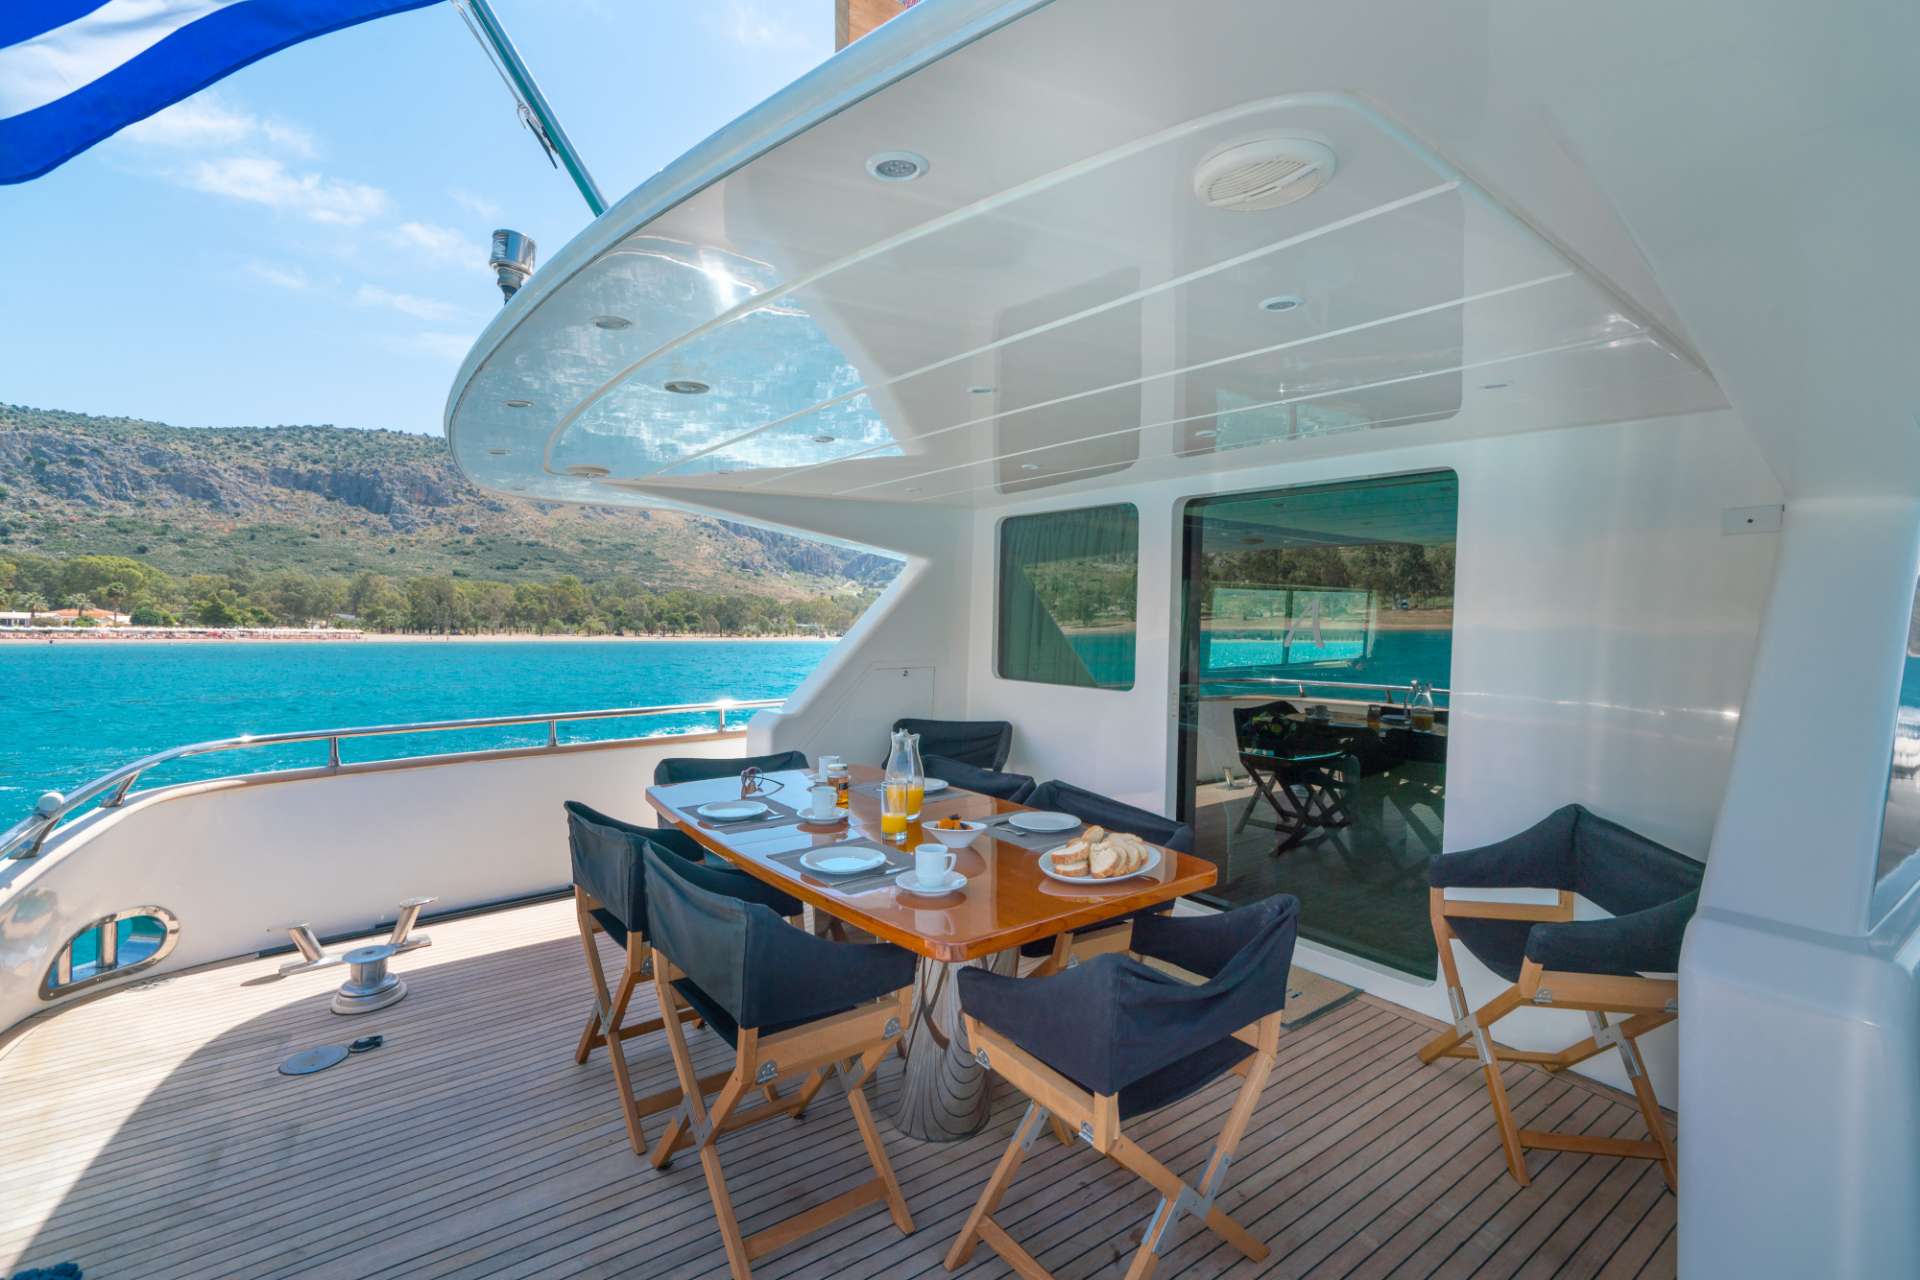 Aft Deck with Alfresco Dining